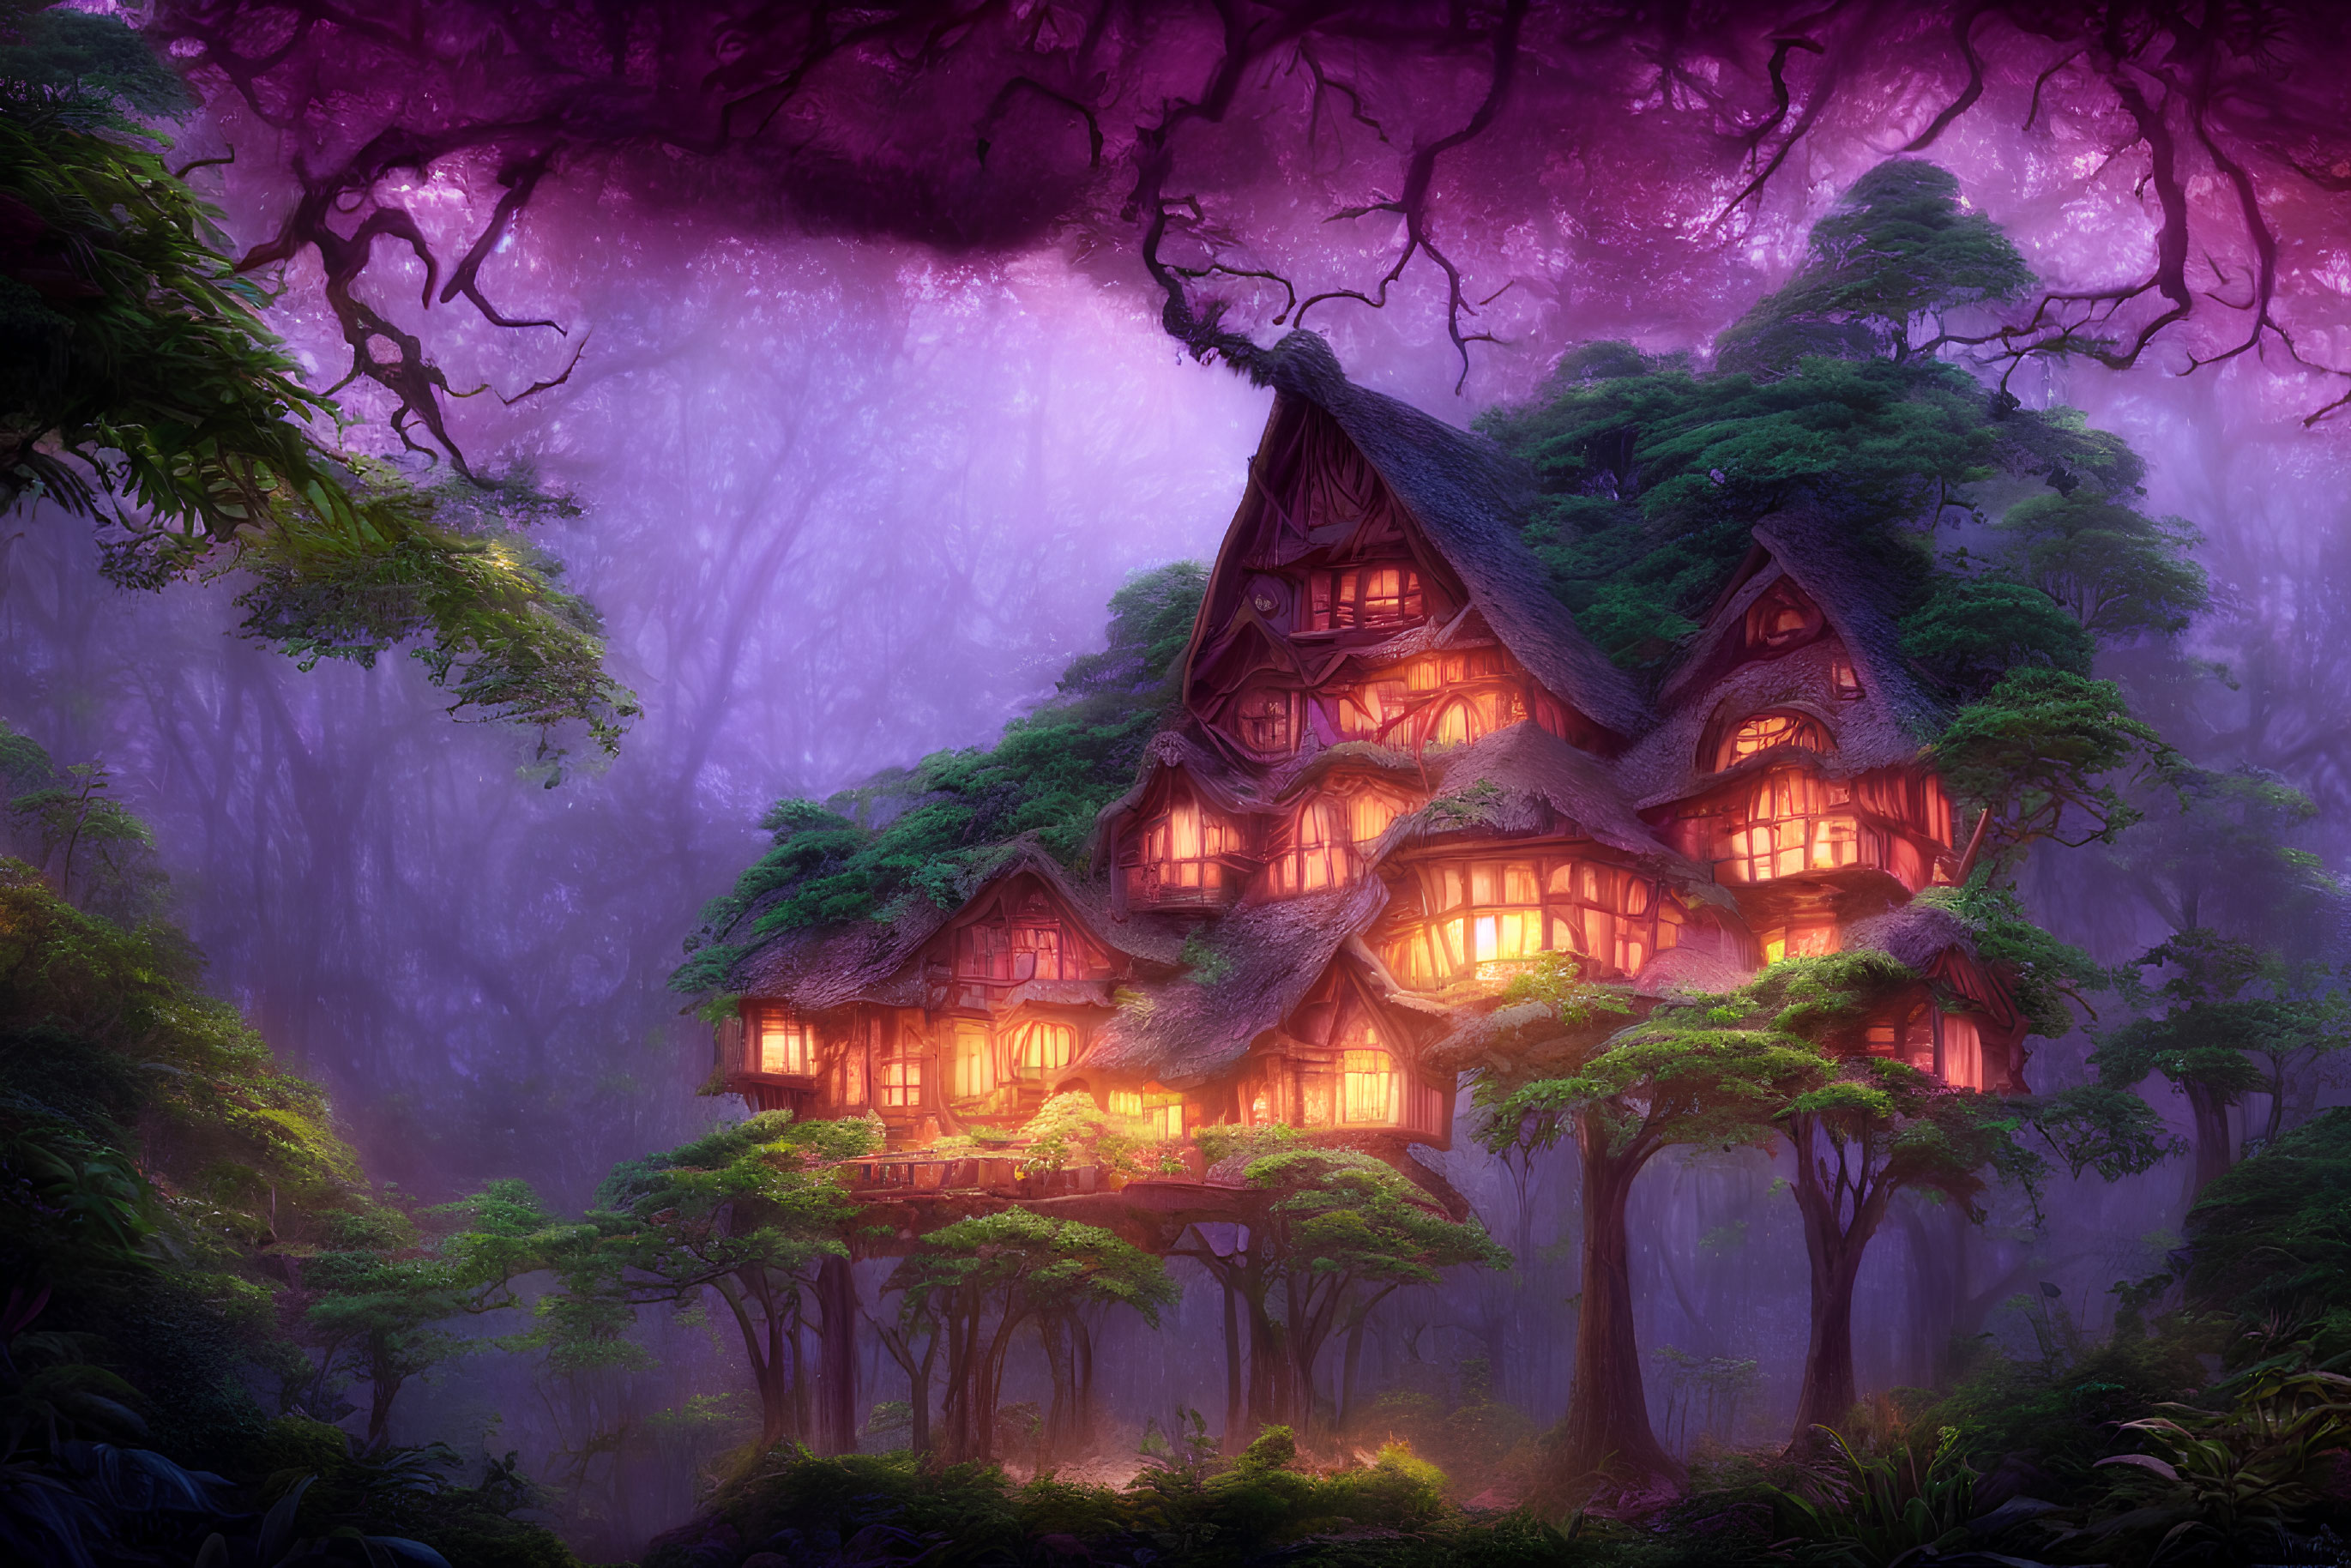 Illustration of multistoried house in mystical purple woods with glowing windows